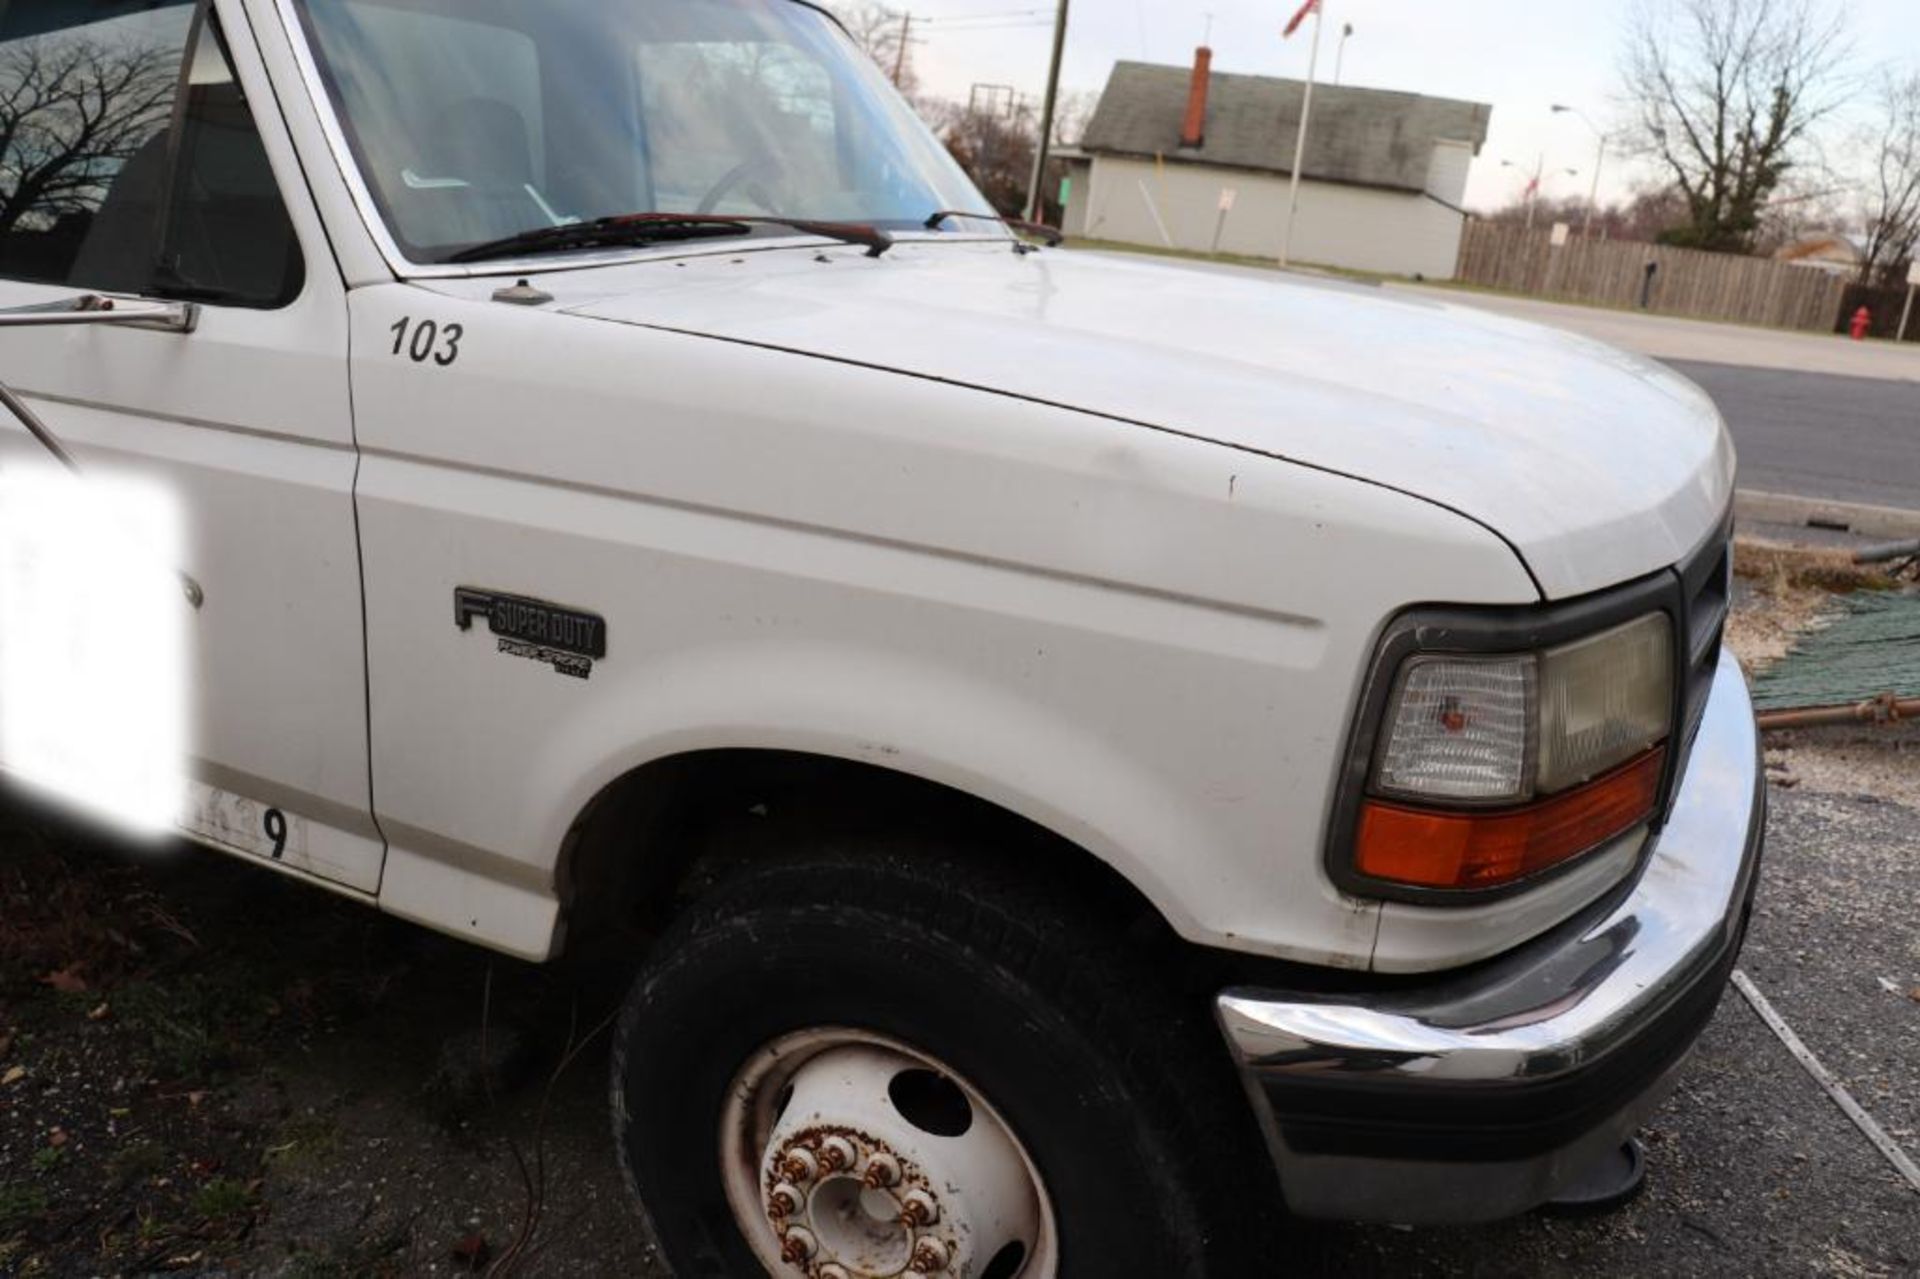 1996 Ford F-Superseries F450 dump truck, needs repair - Image 4 of 13